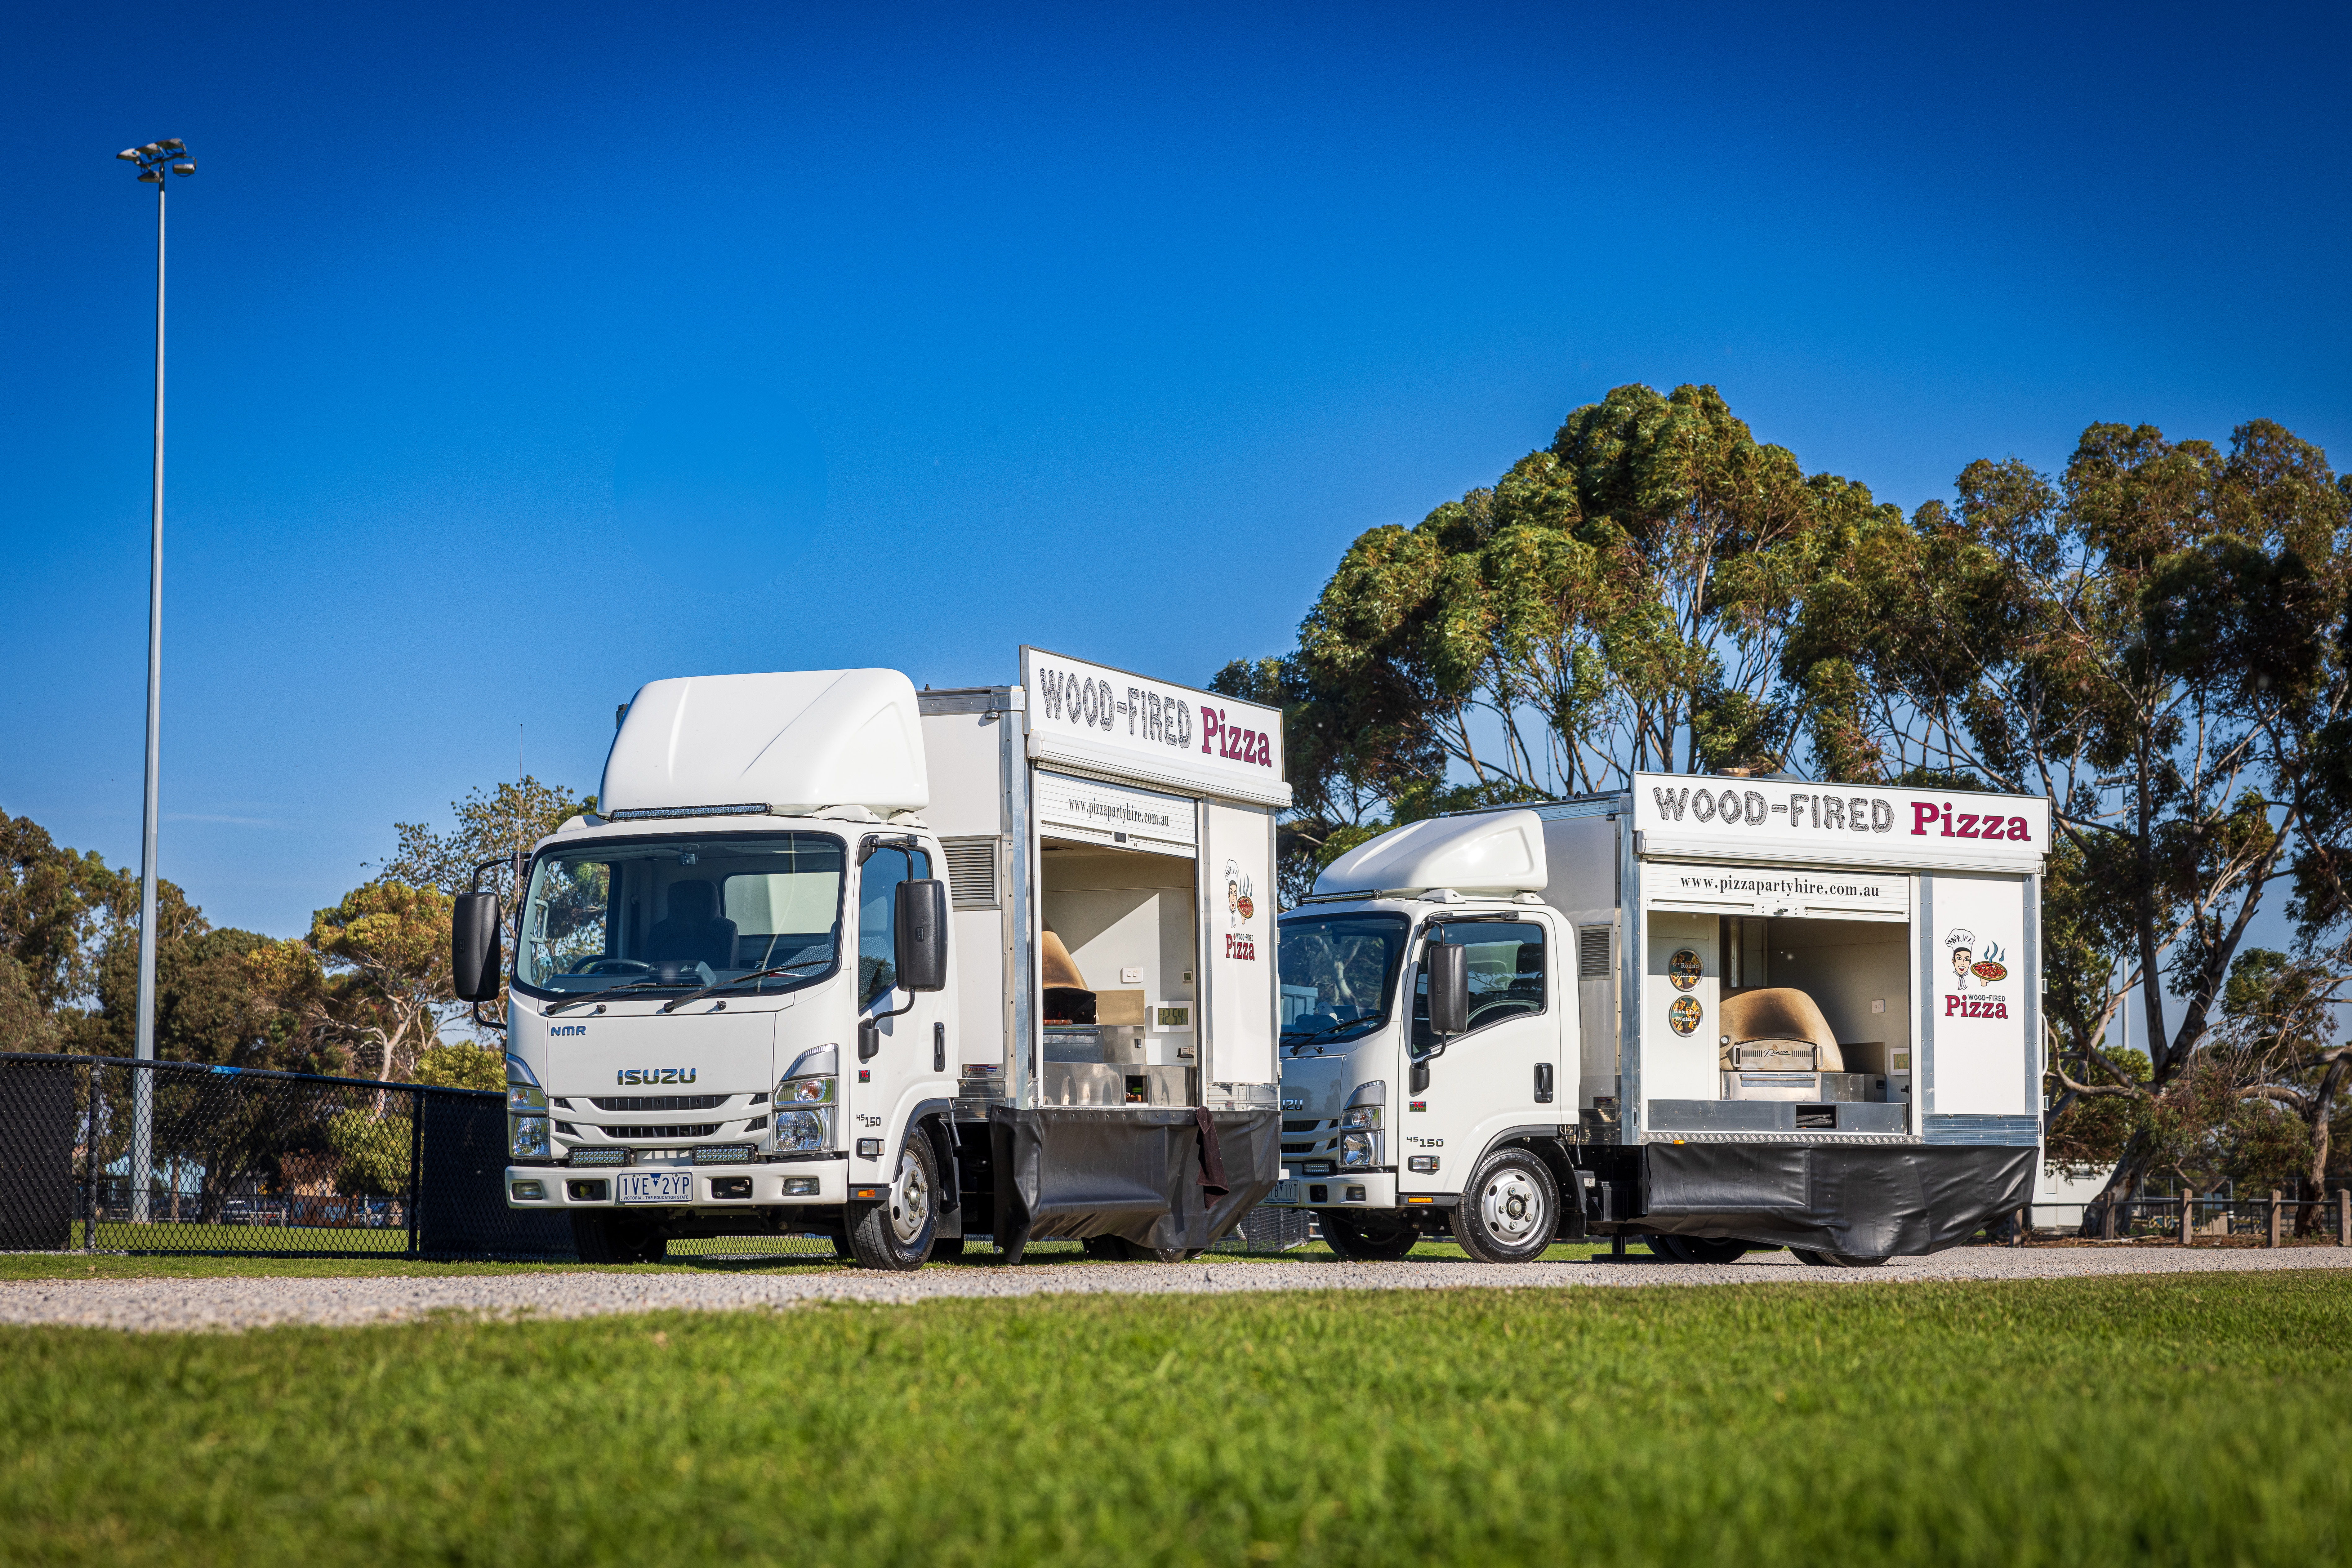 The two trucks provide great flexibility for Pizza Party Hire